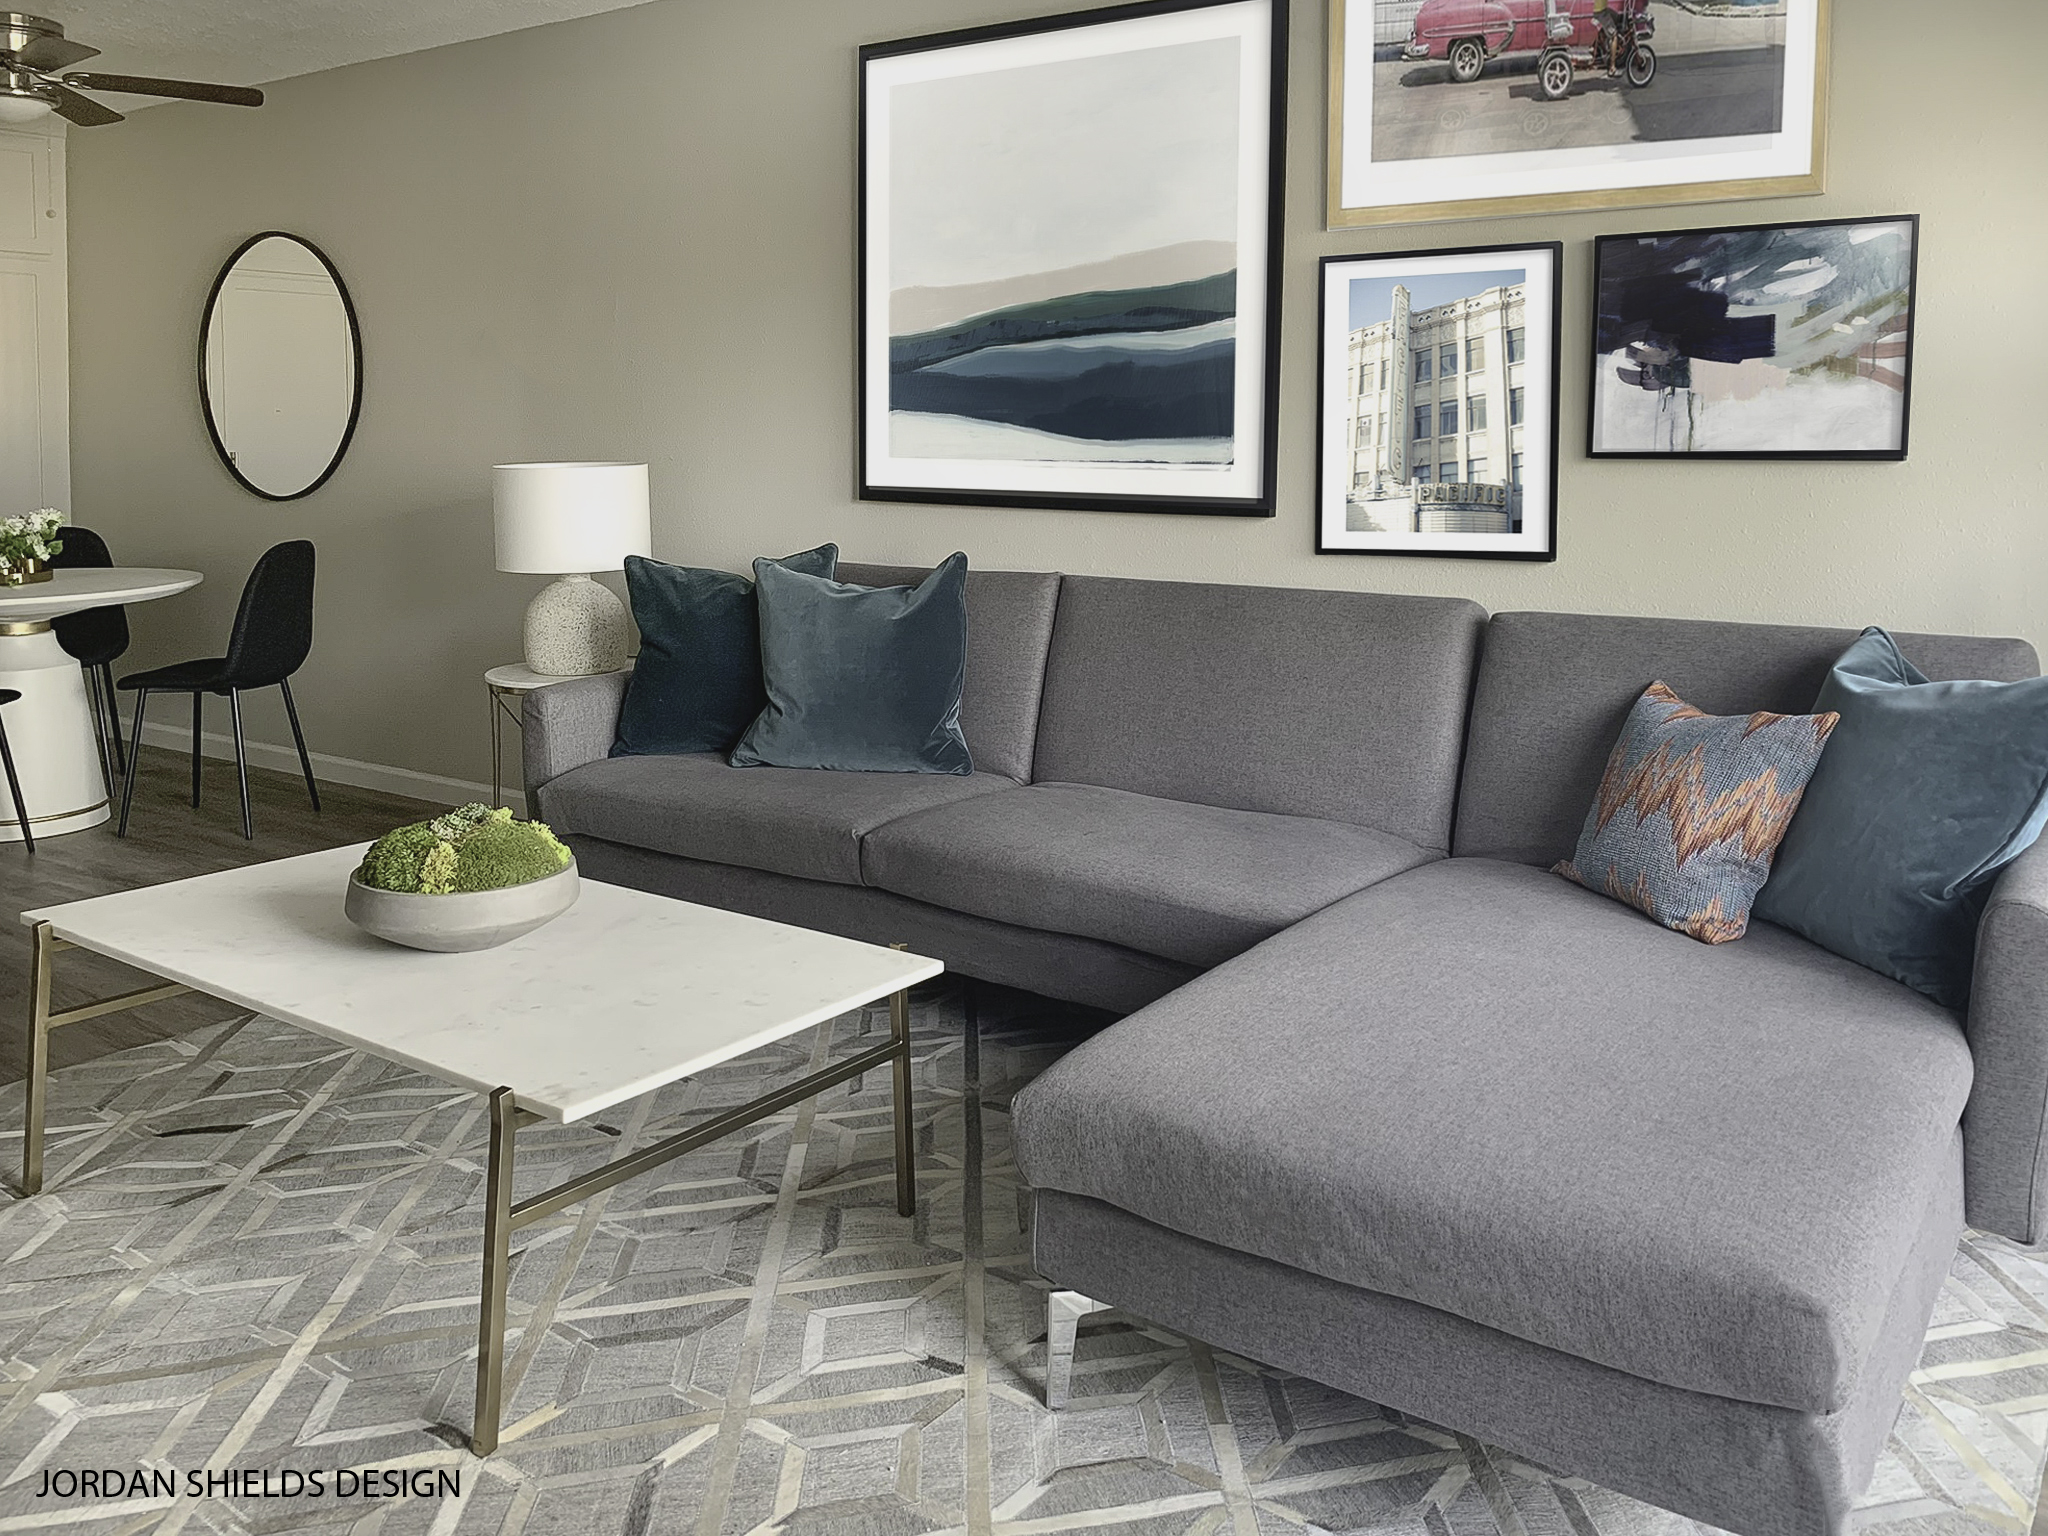 Image of room in San regis. Area has grey sectional with blue pillows over grey and white area rug. White coffee table. decroative pictures over sofa area. white round kitchen table and black chairs in dining area